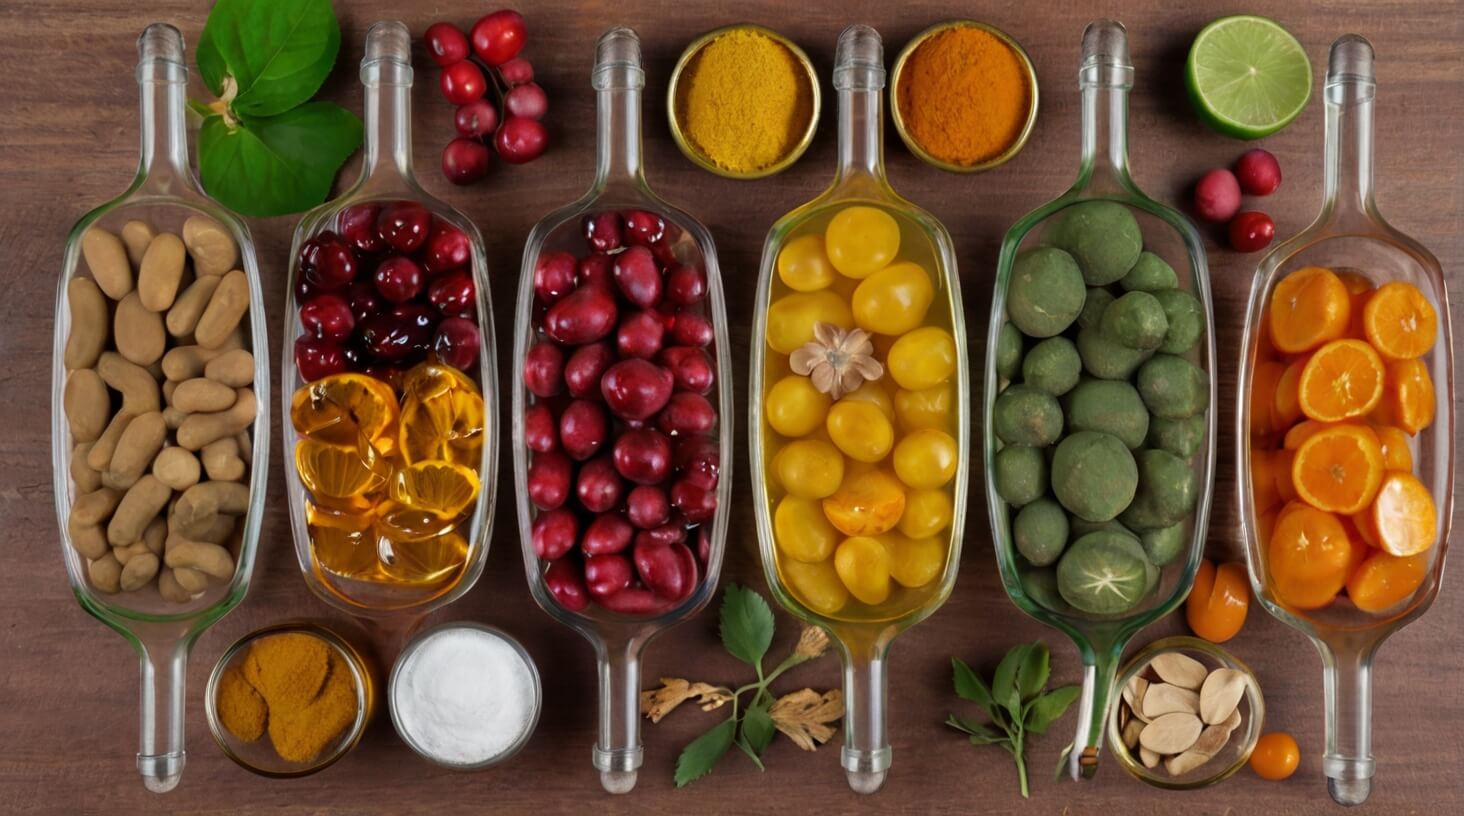 Image of assorted natural supplements arranged neatly, promoting immunity support.